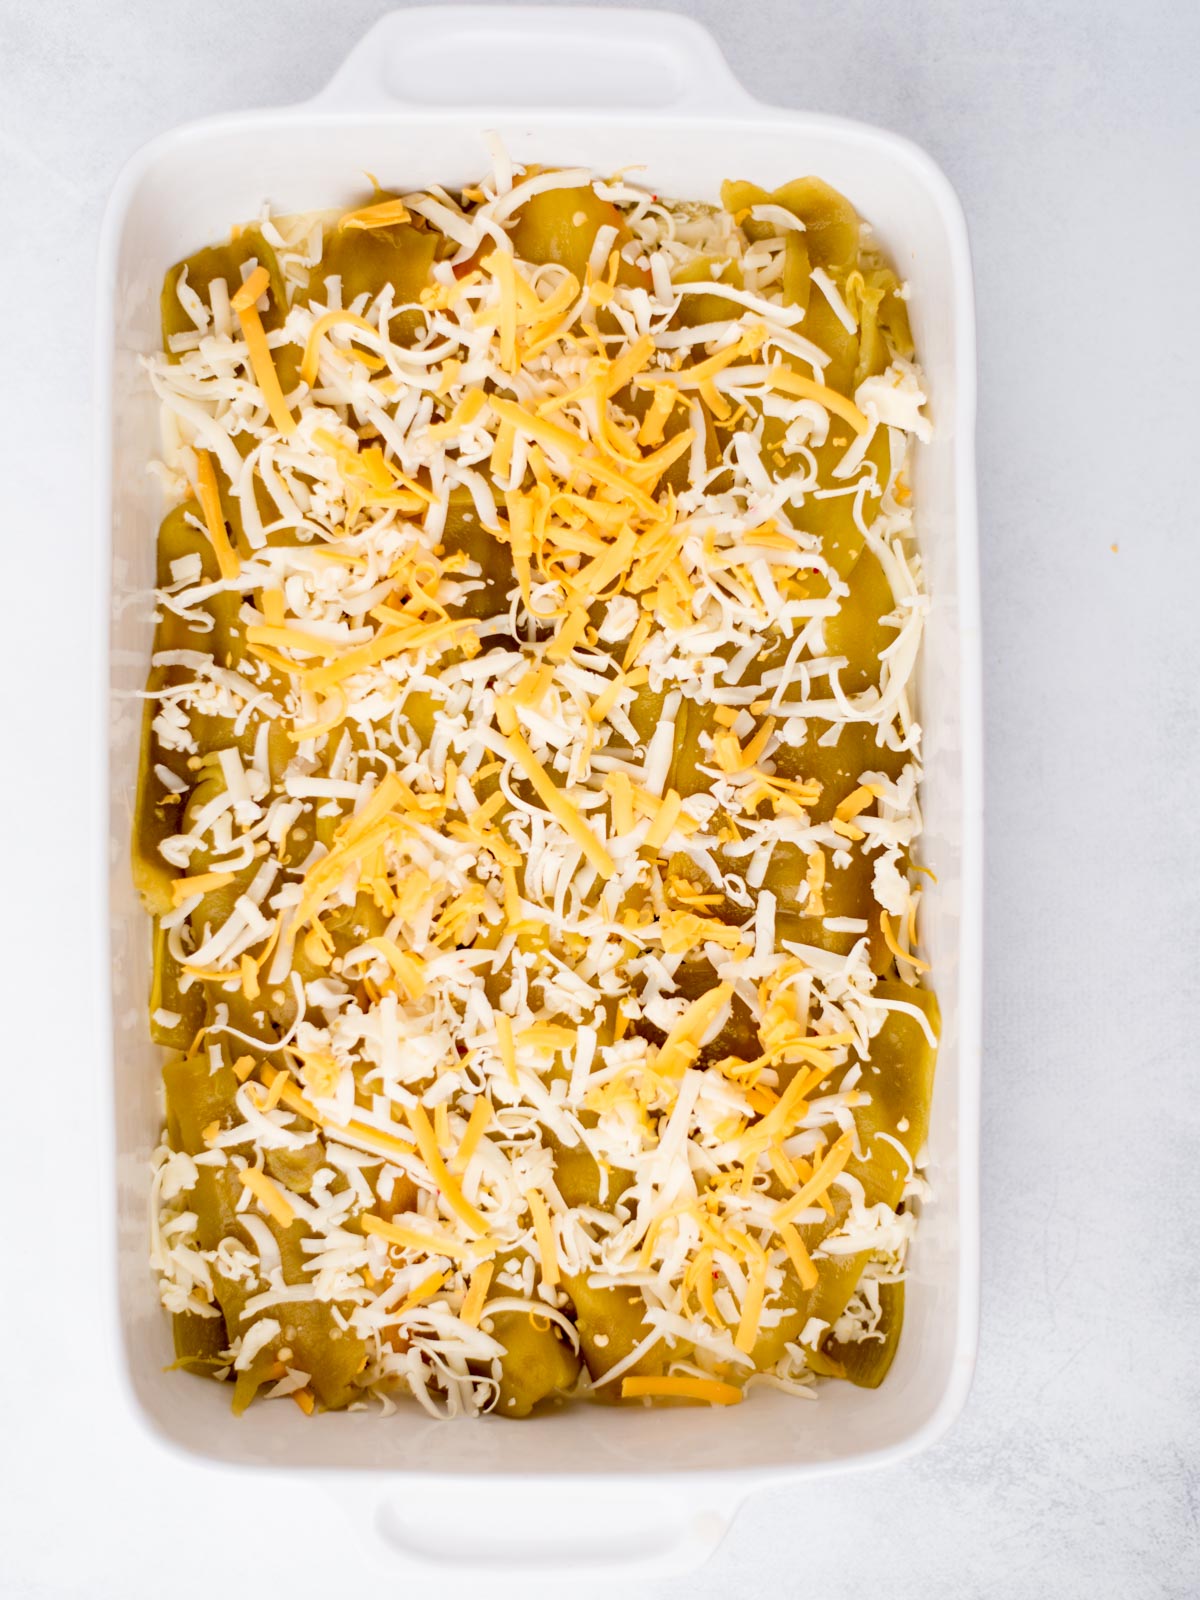 Casserole baking dish with egg mixture, hatch chiles and shredded cheese layered in it.